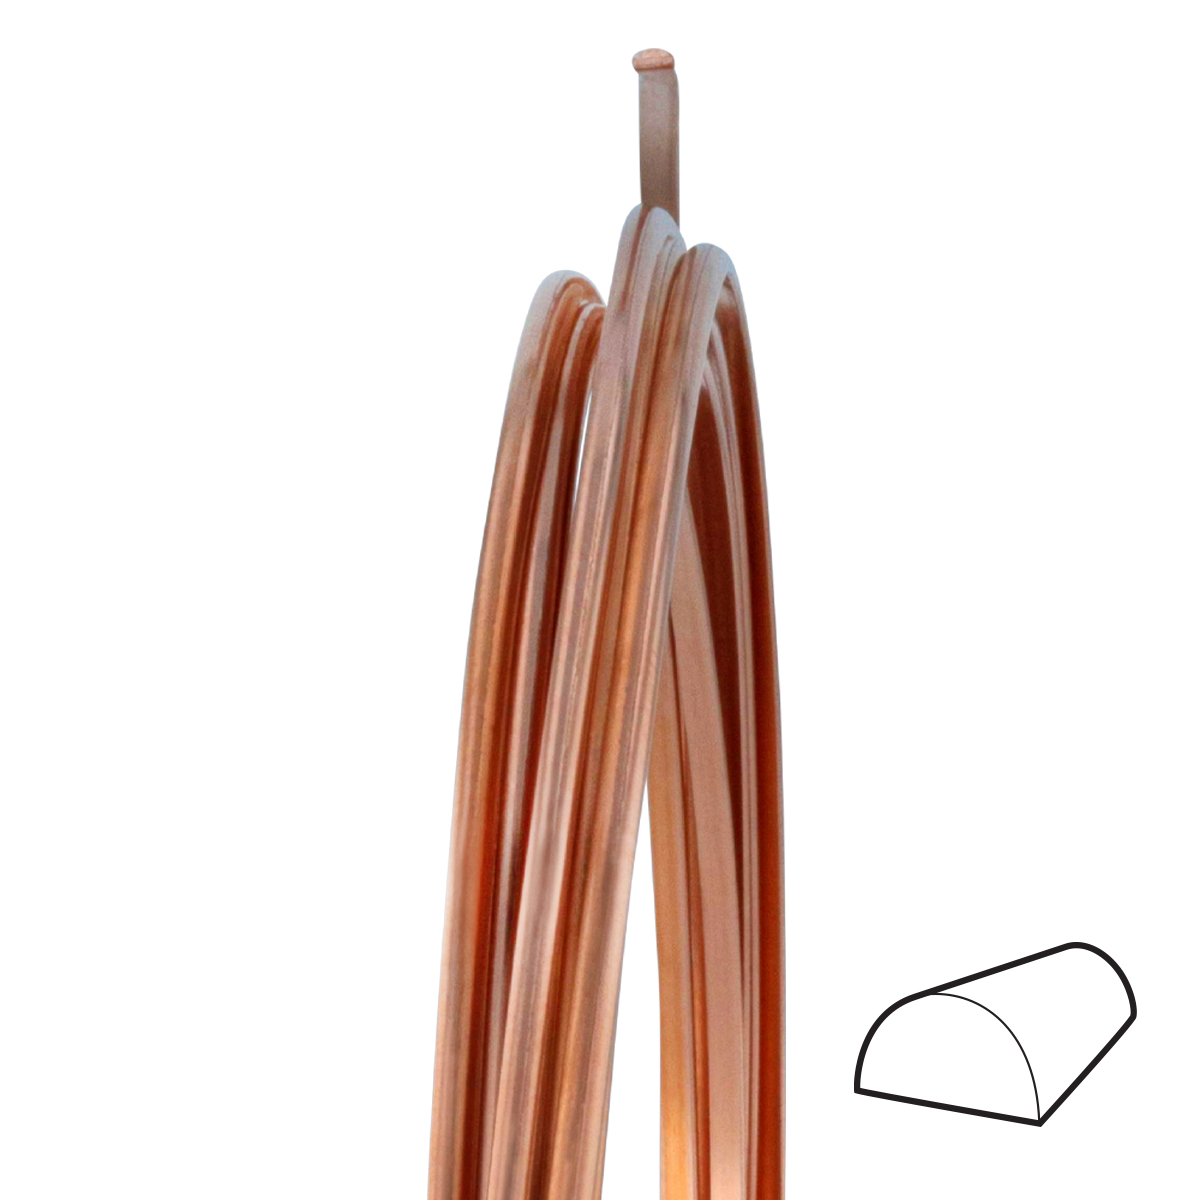 14 Gauge Square Half Hard Copper Wire: Jewelry Making Supplies, Instructions